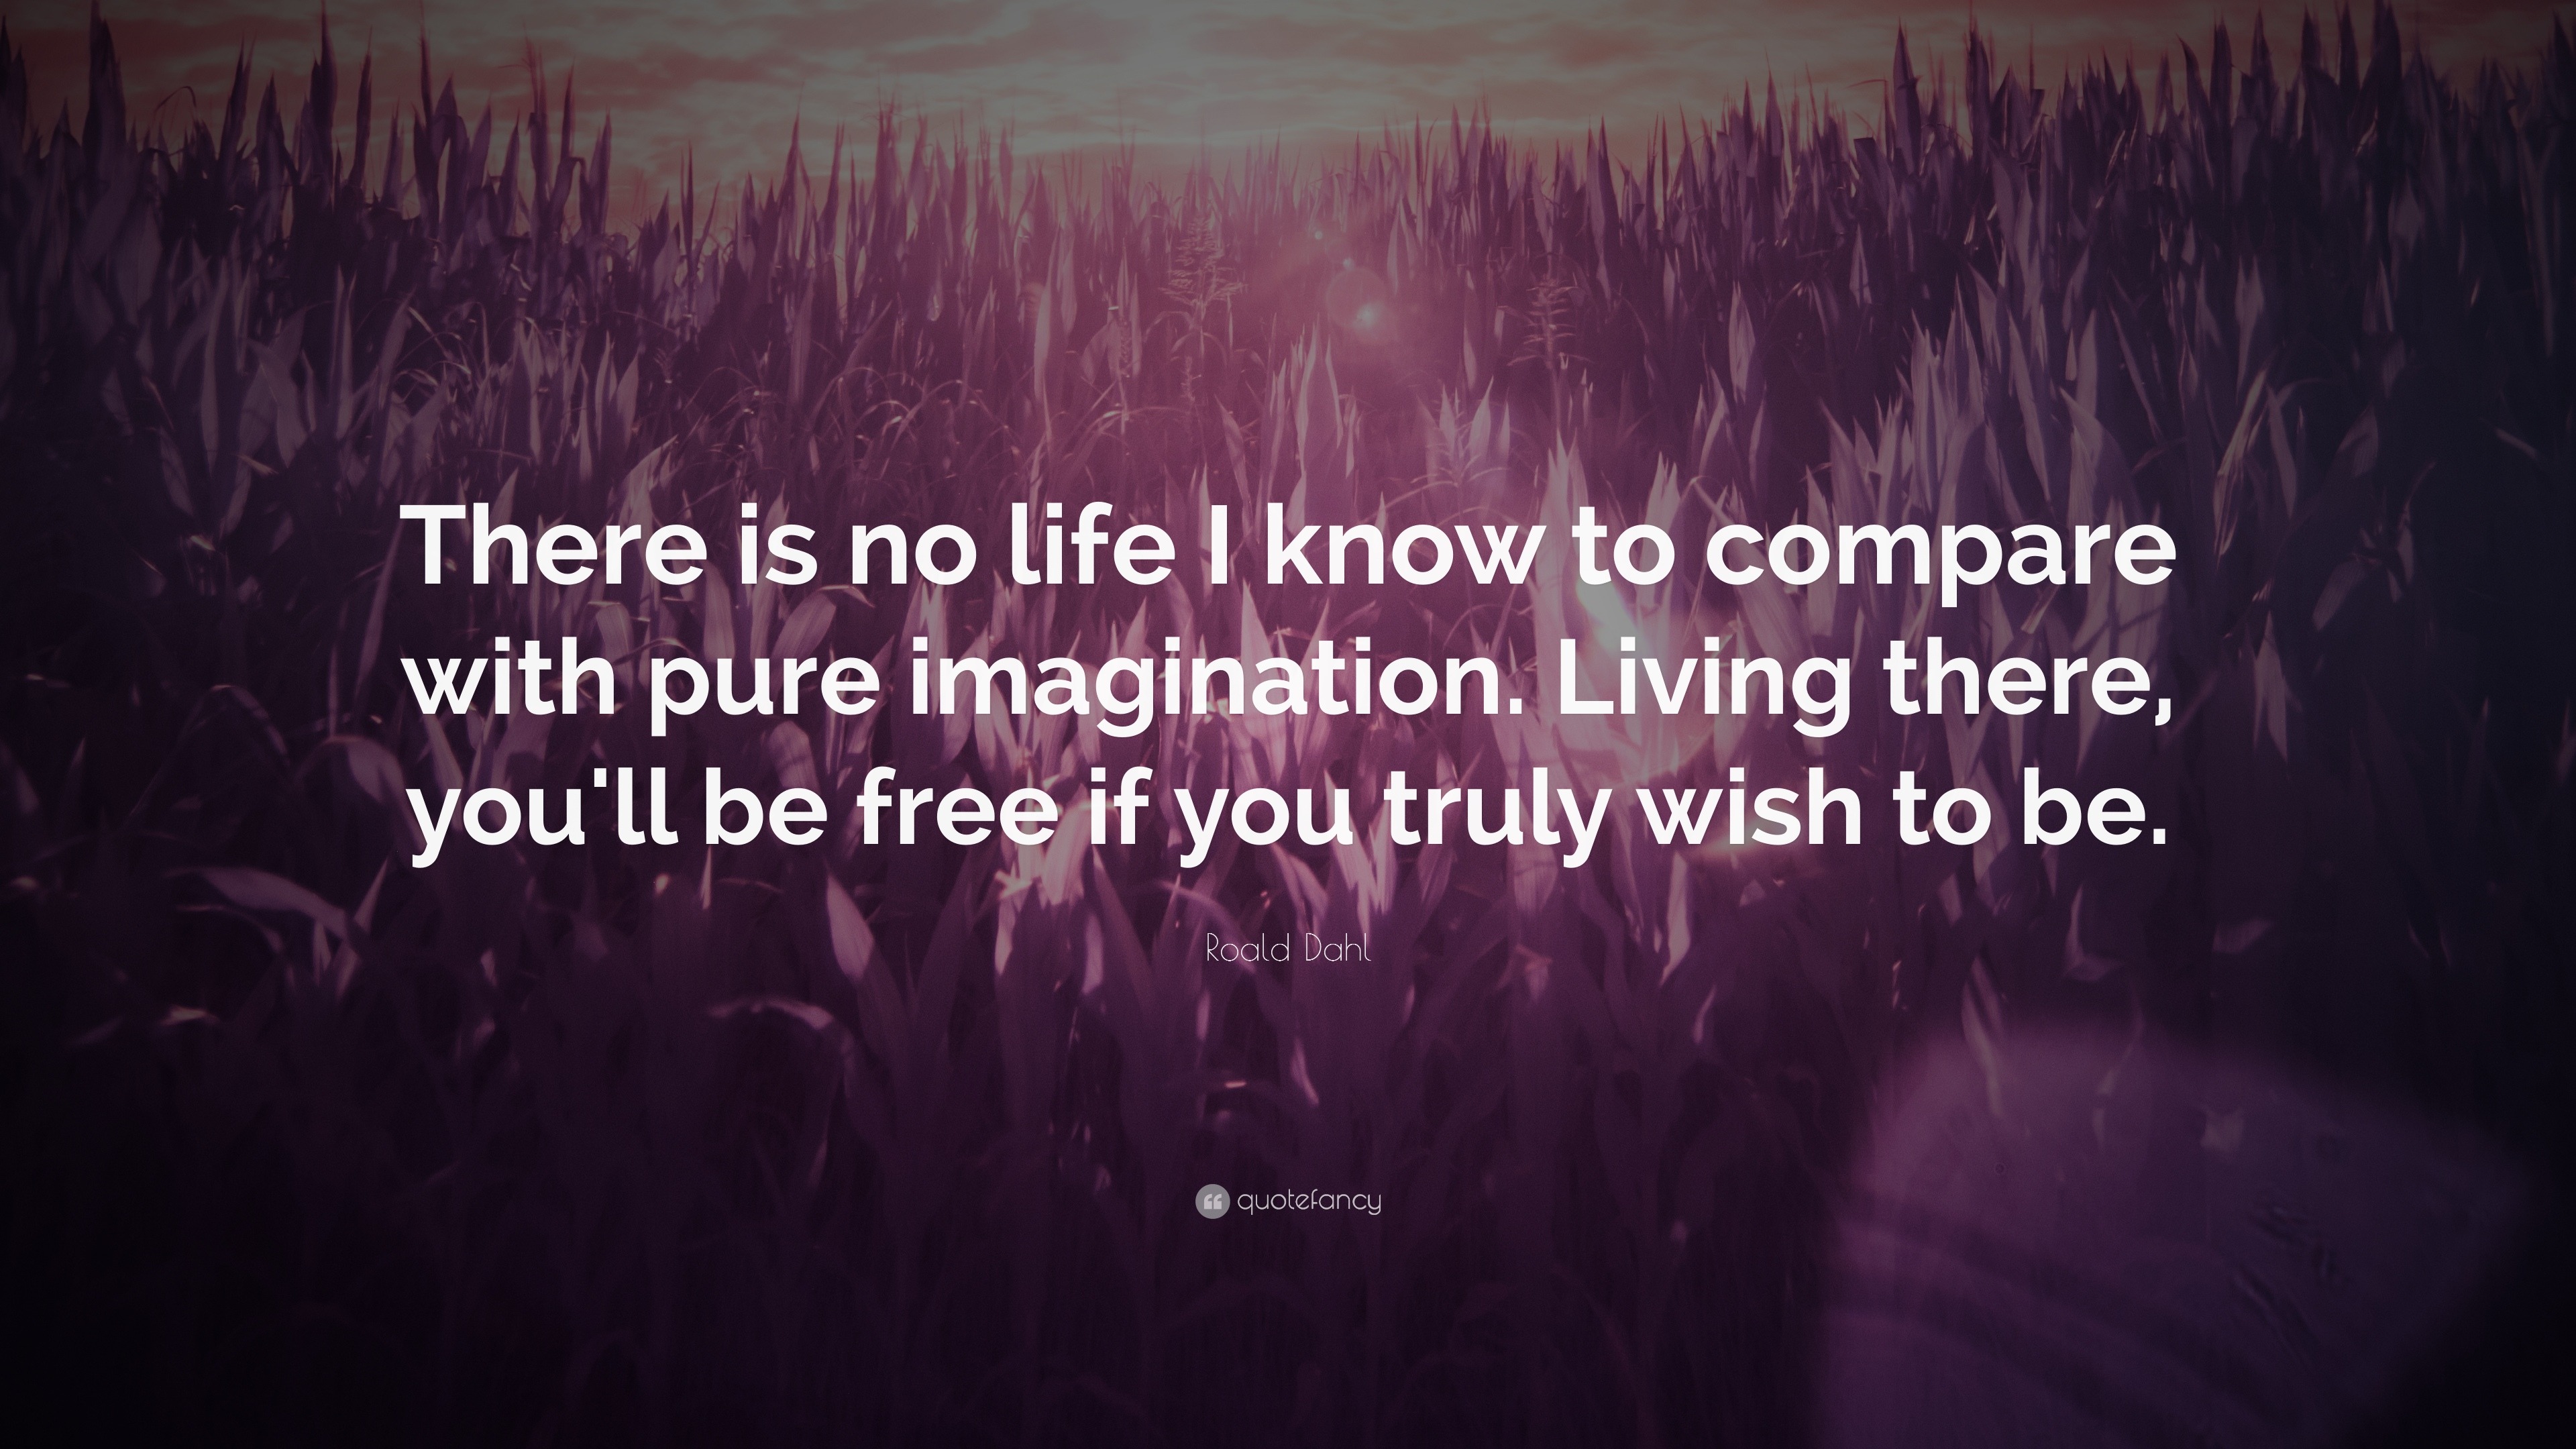 9758 Roald Dahl Quote There is no life I know to compare with pure